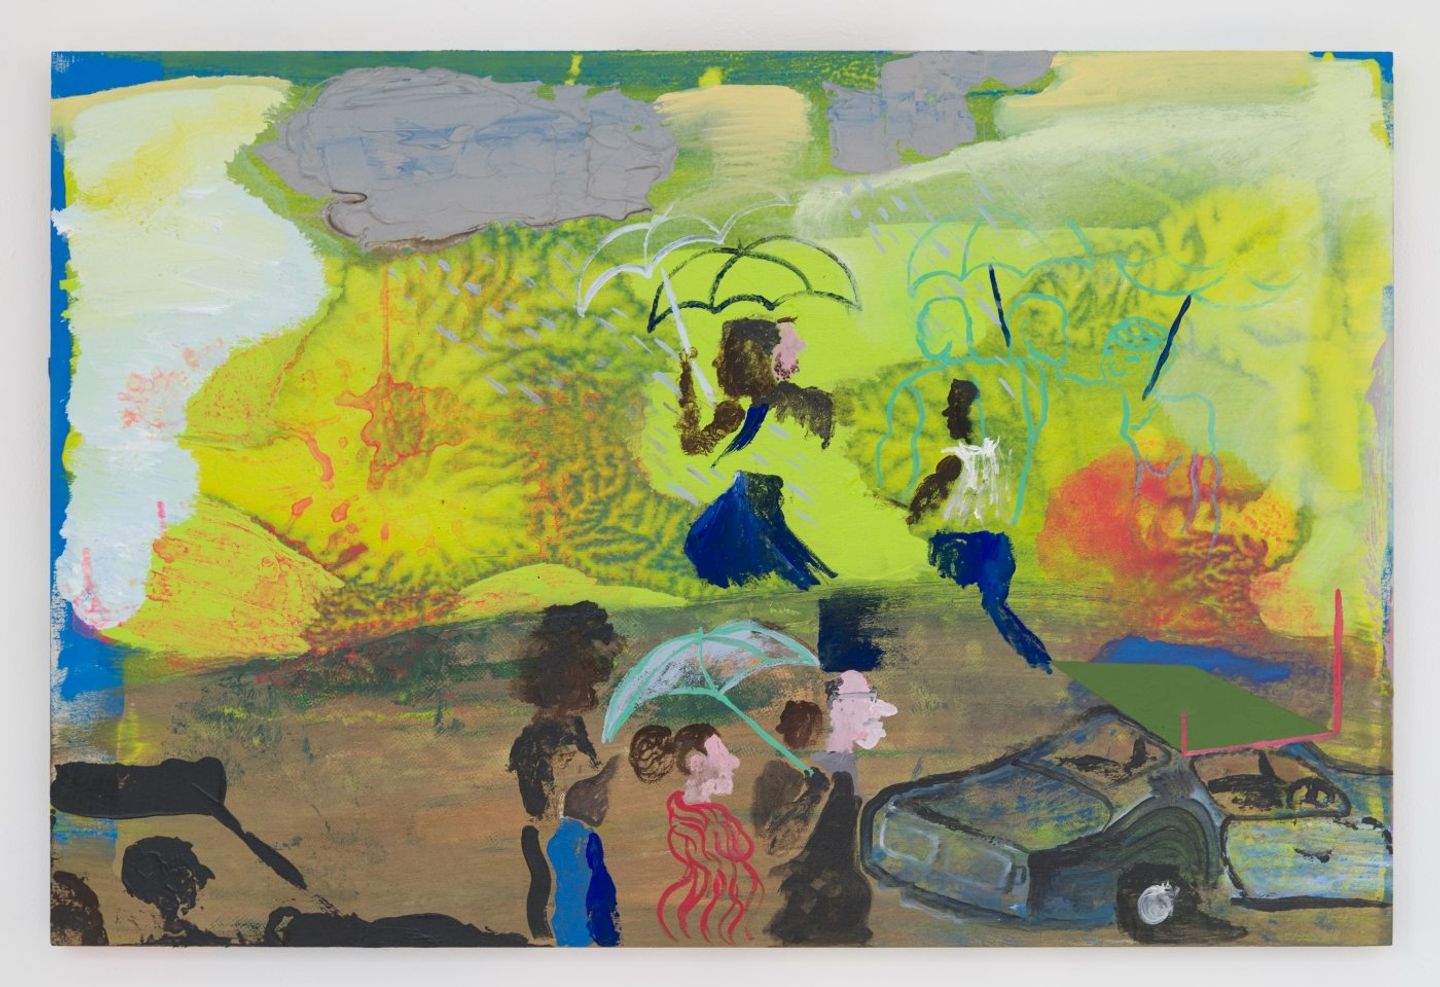 Walter Price, It has to rain before you can see where all the leaks are at (2019). Acrylic and vinyl on wood. 61 x 91.4 x 5.1 cm. Courtesy Greene Naftali.